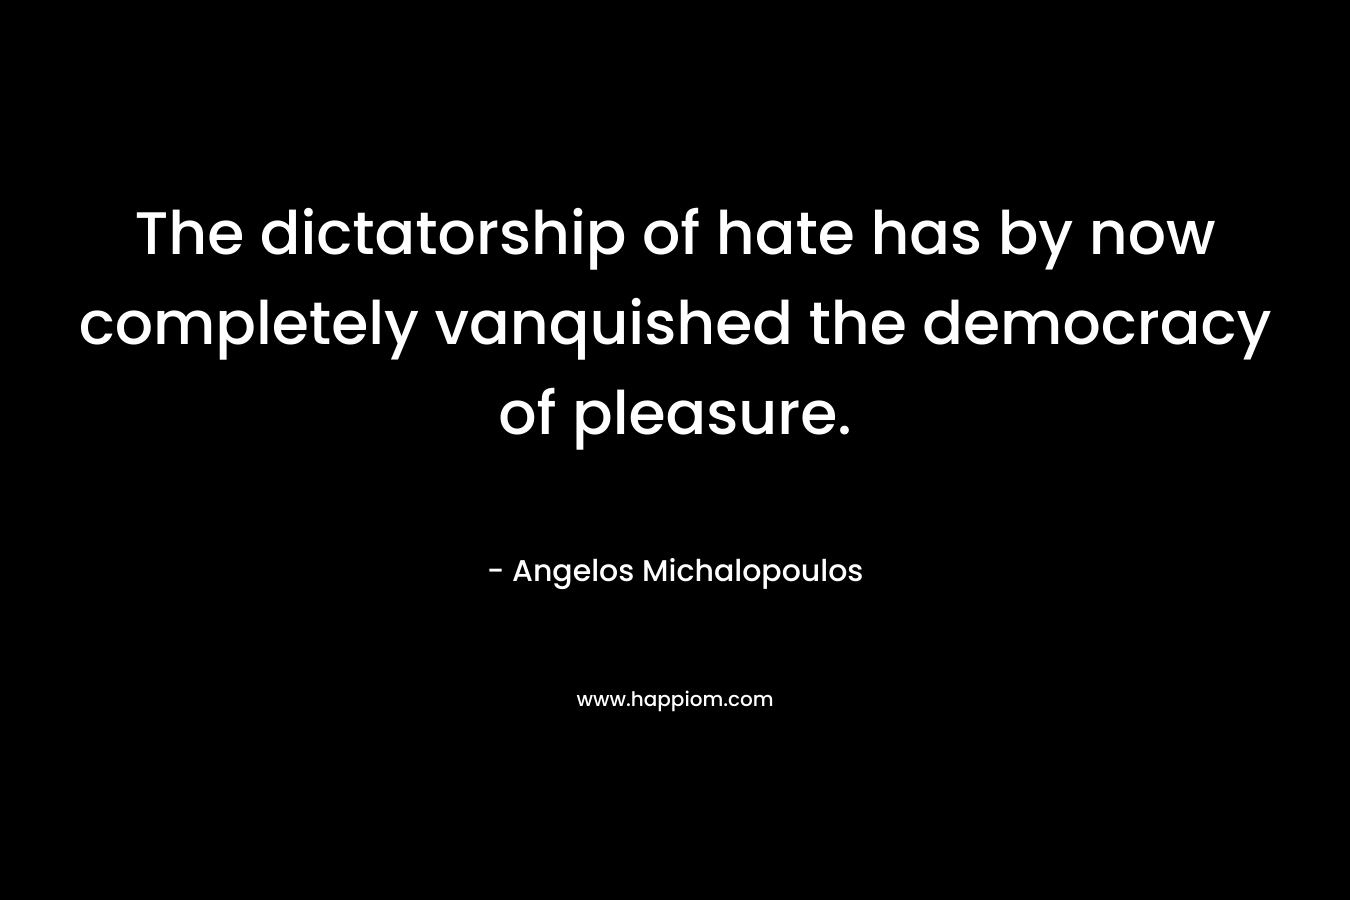 The dictatorship of hate has by now completely vanquished the democracy of pleasure.